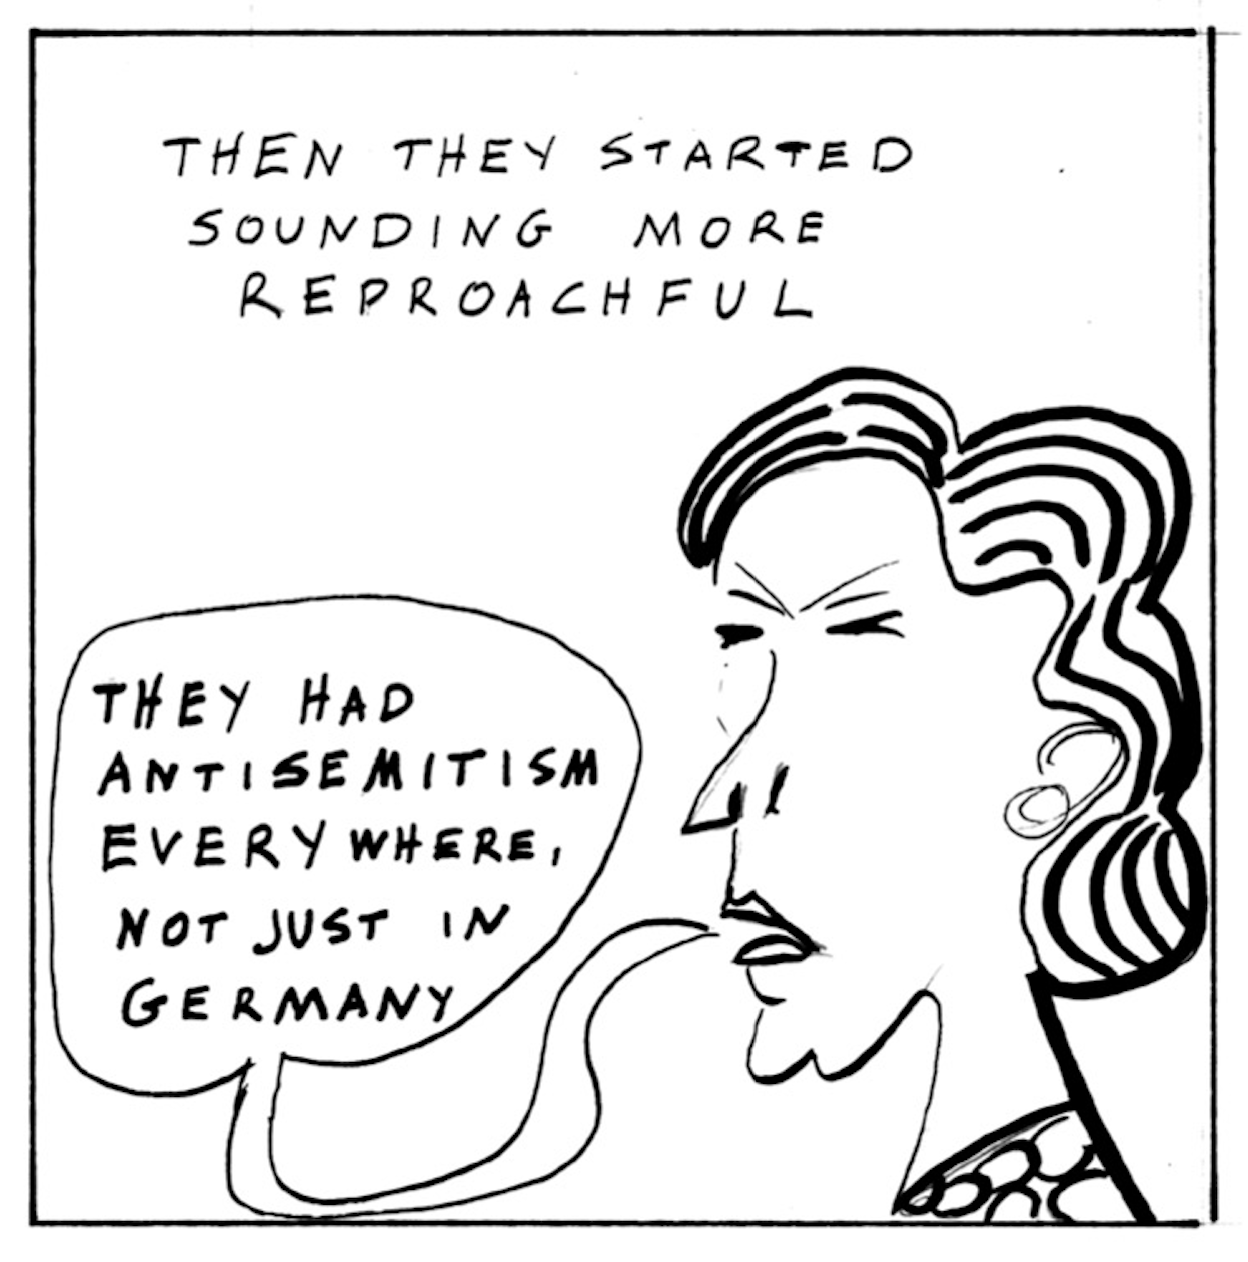 “Then they started sounding more reproachful.” Marlies says, “They had antisemitism everywhere, not just in Germany.”